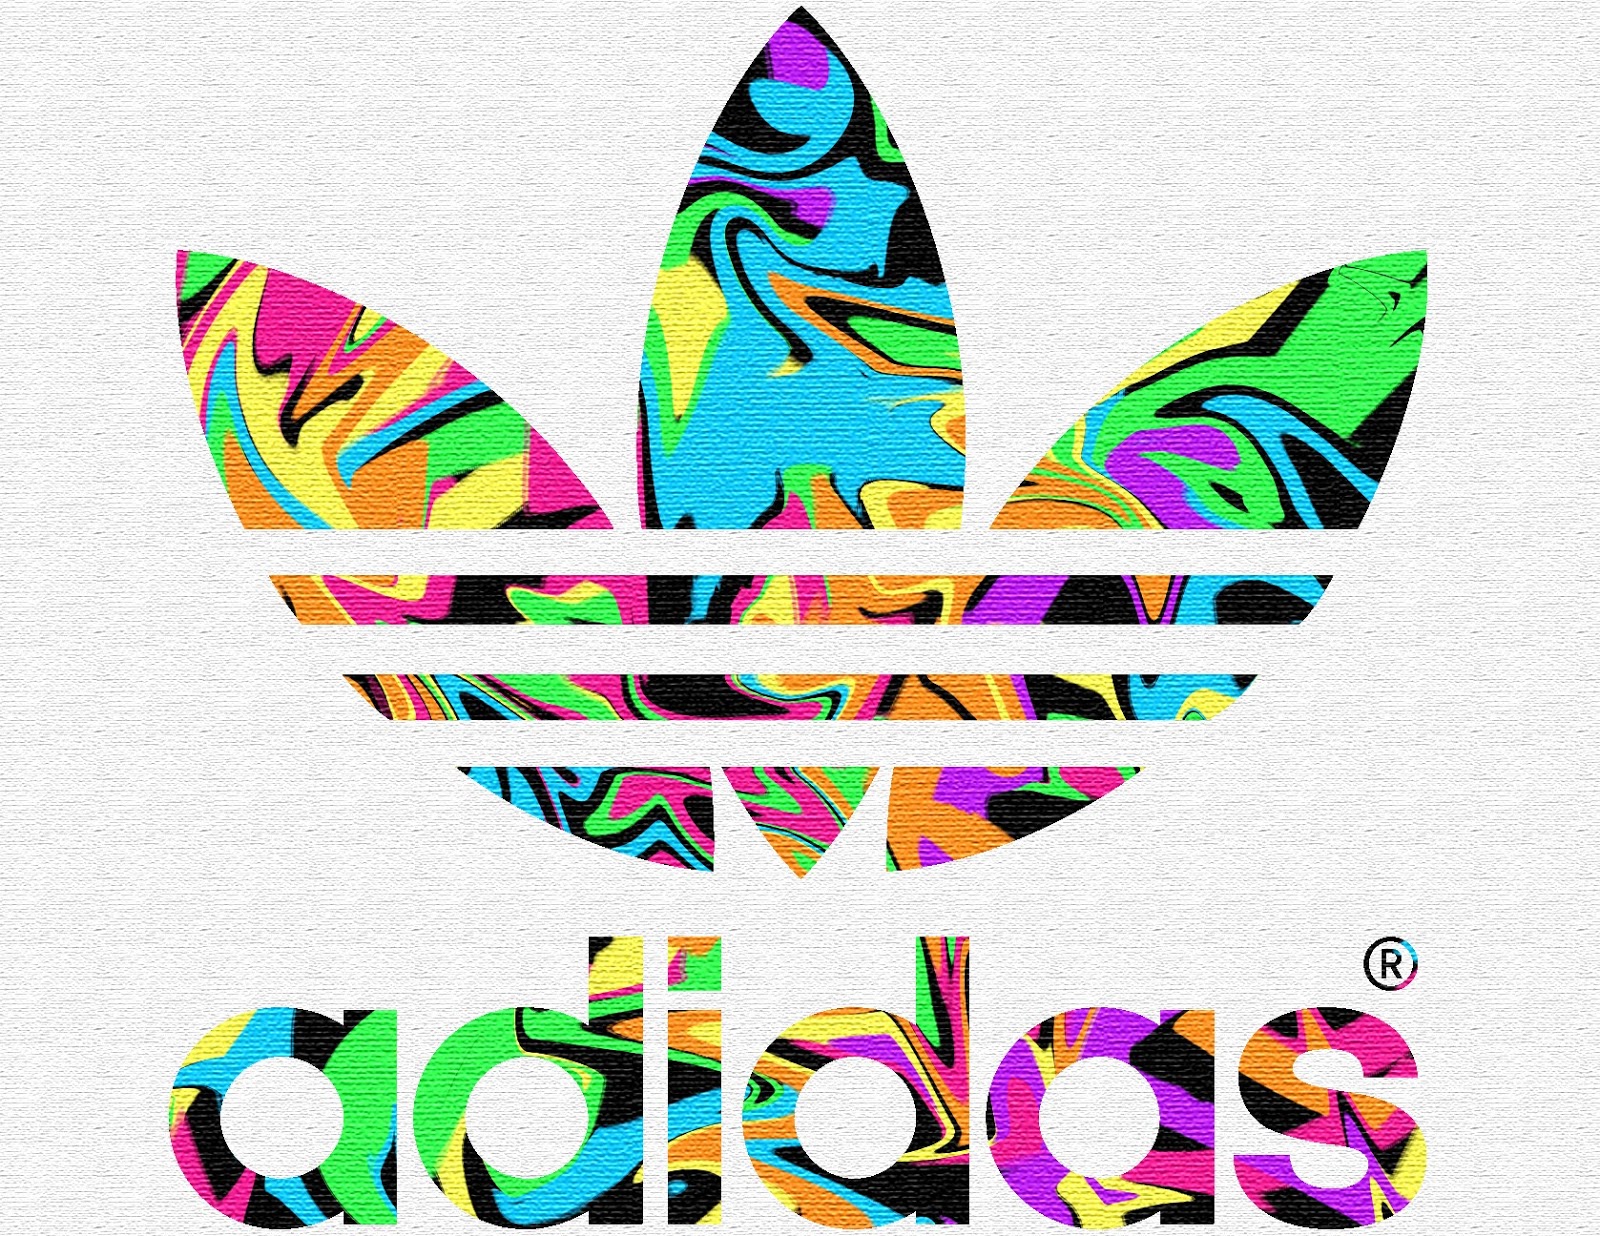 ADIDAS created a cool psychedelic logo